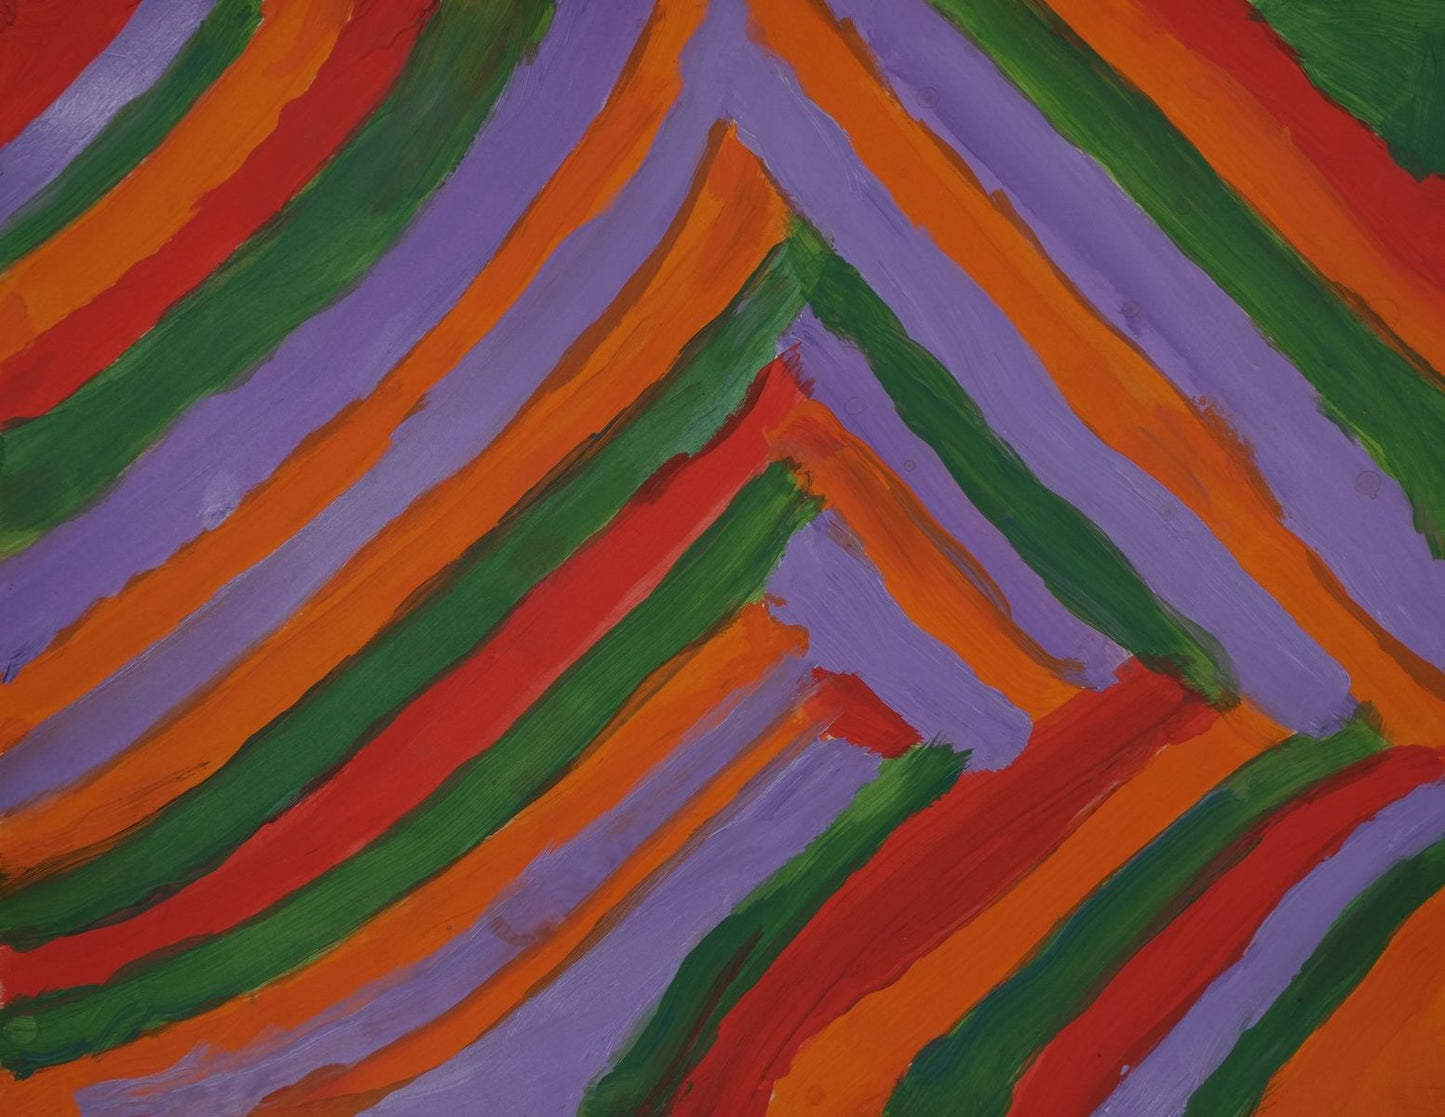 Acrylic on paper artwork depicting red, purple, green, and orange lines working inwards